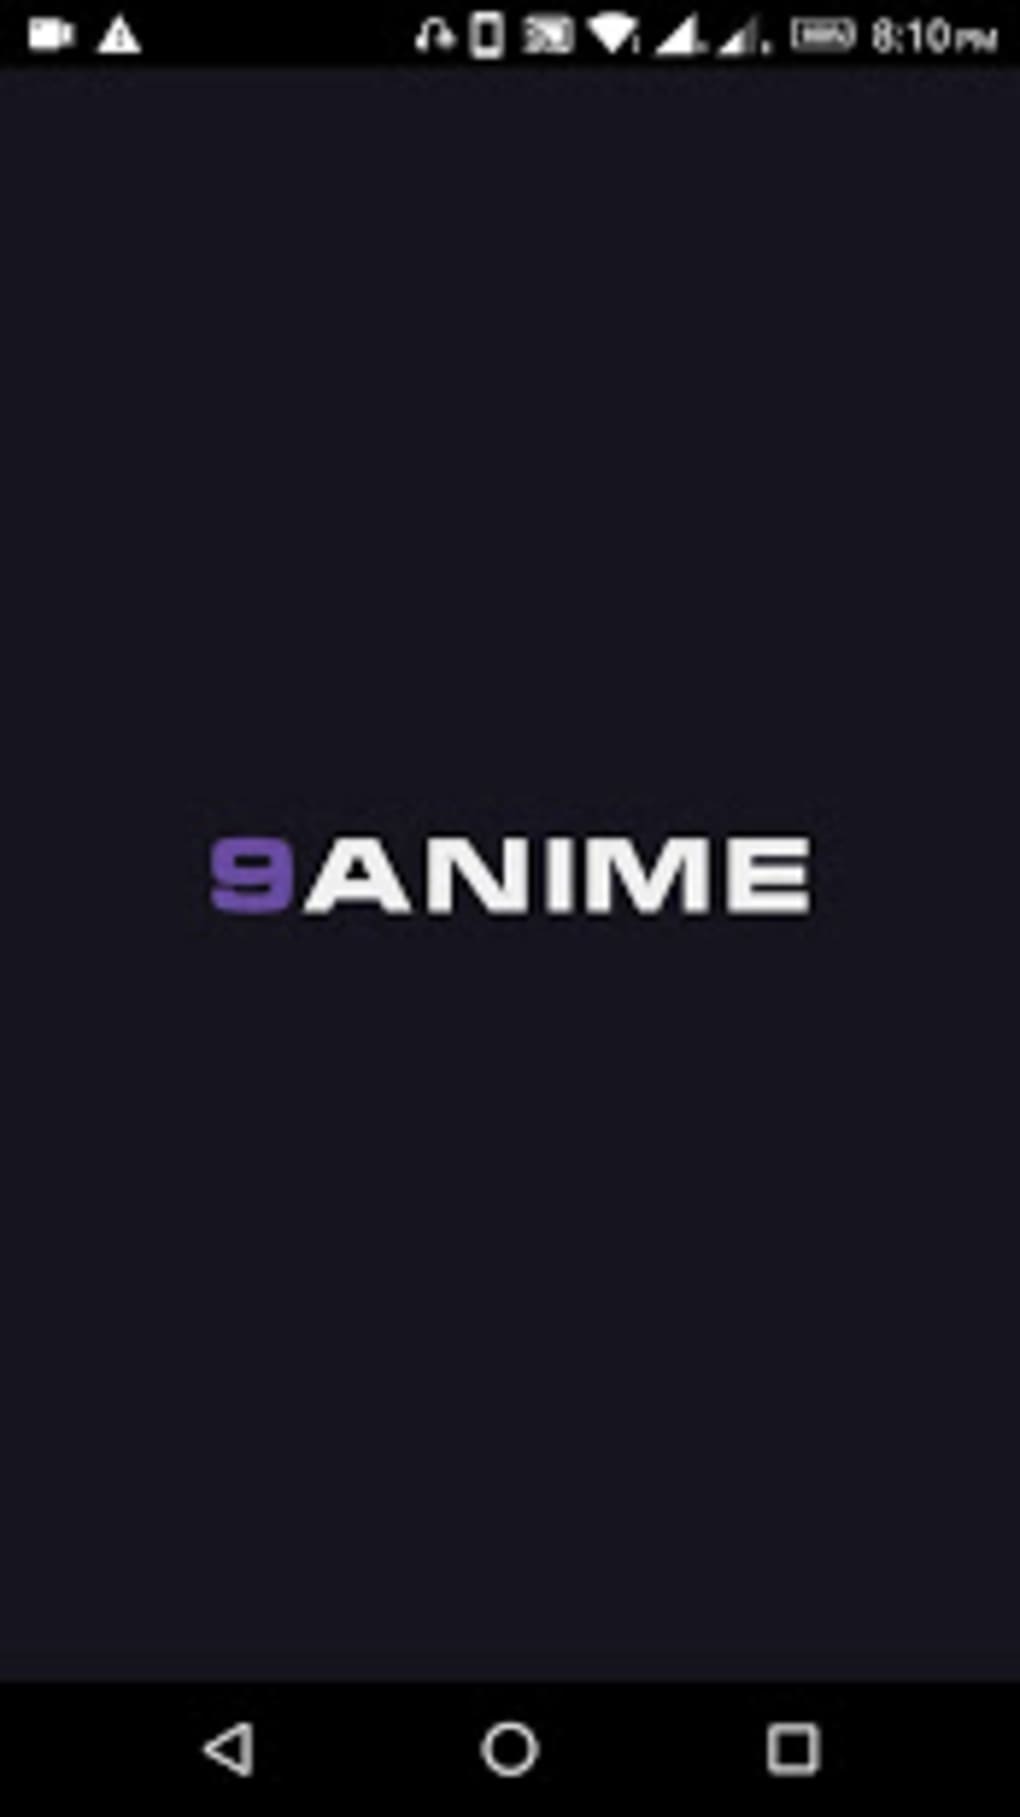 9Anime APK para Android - Download